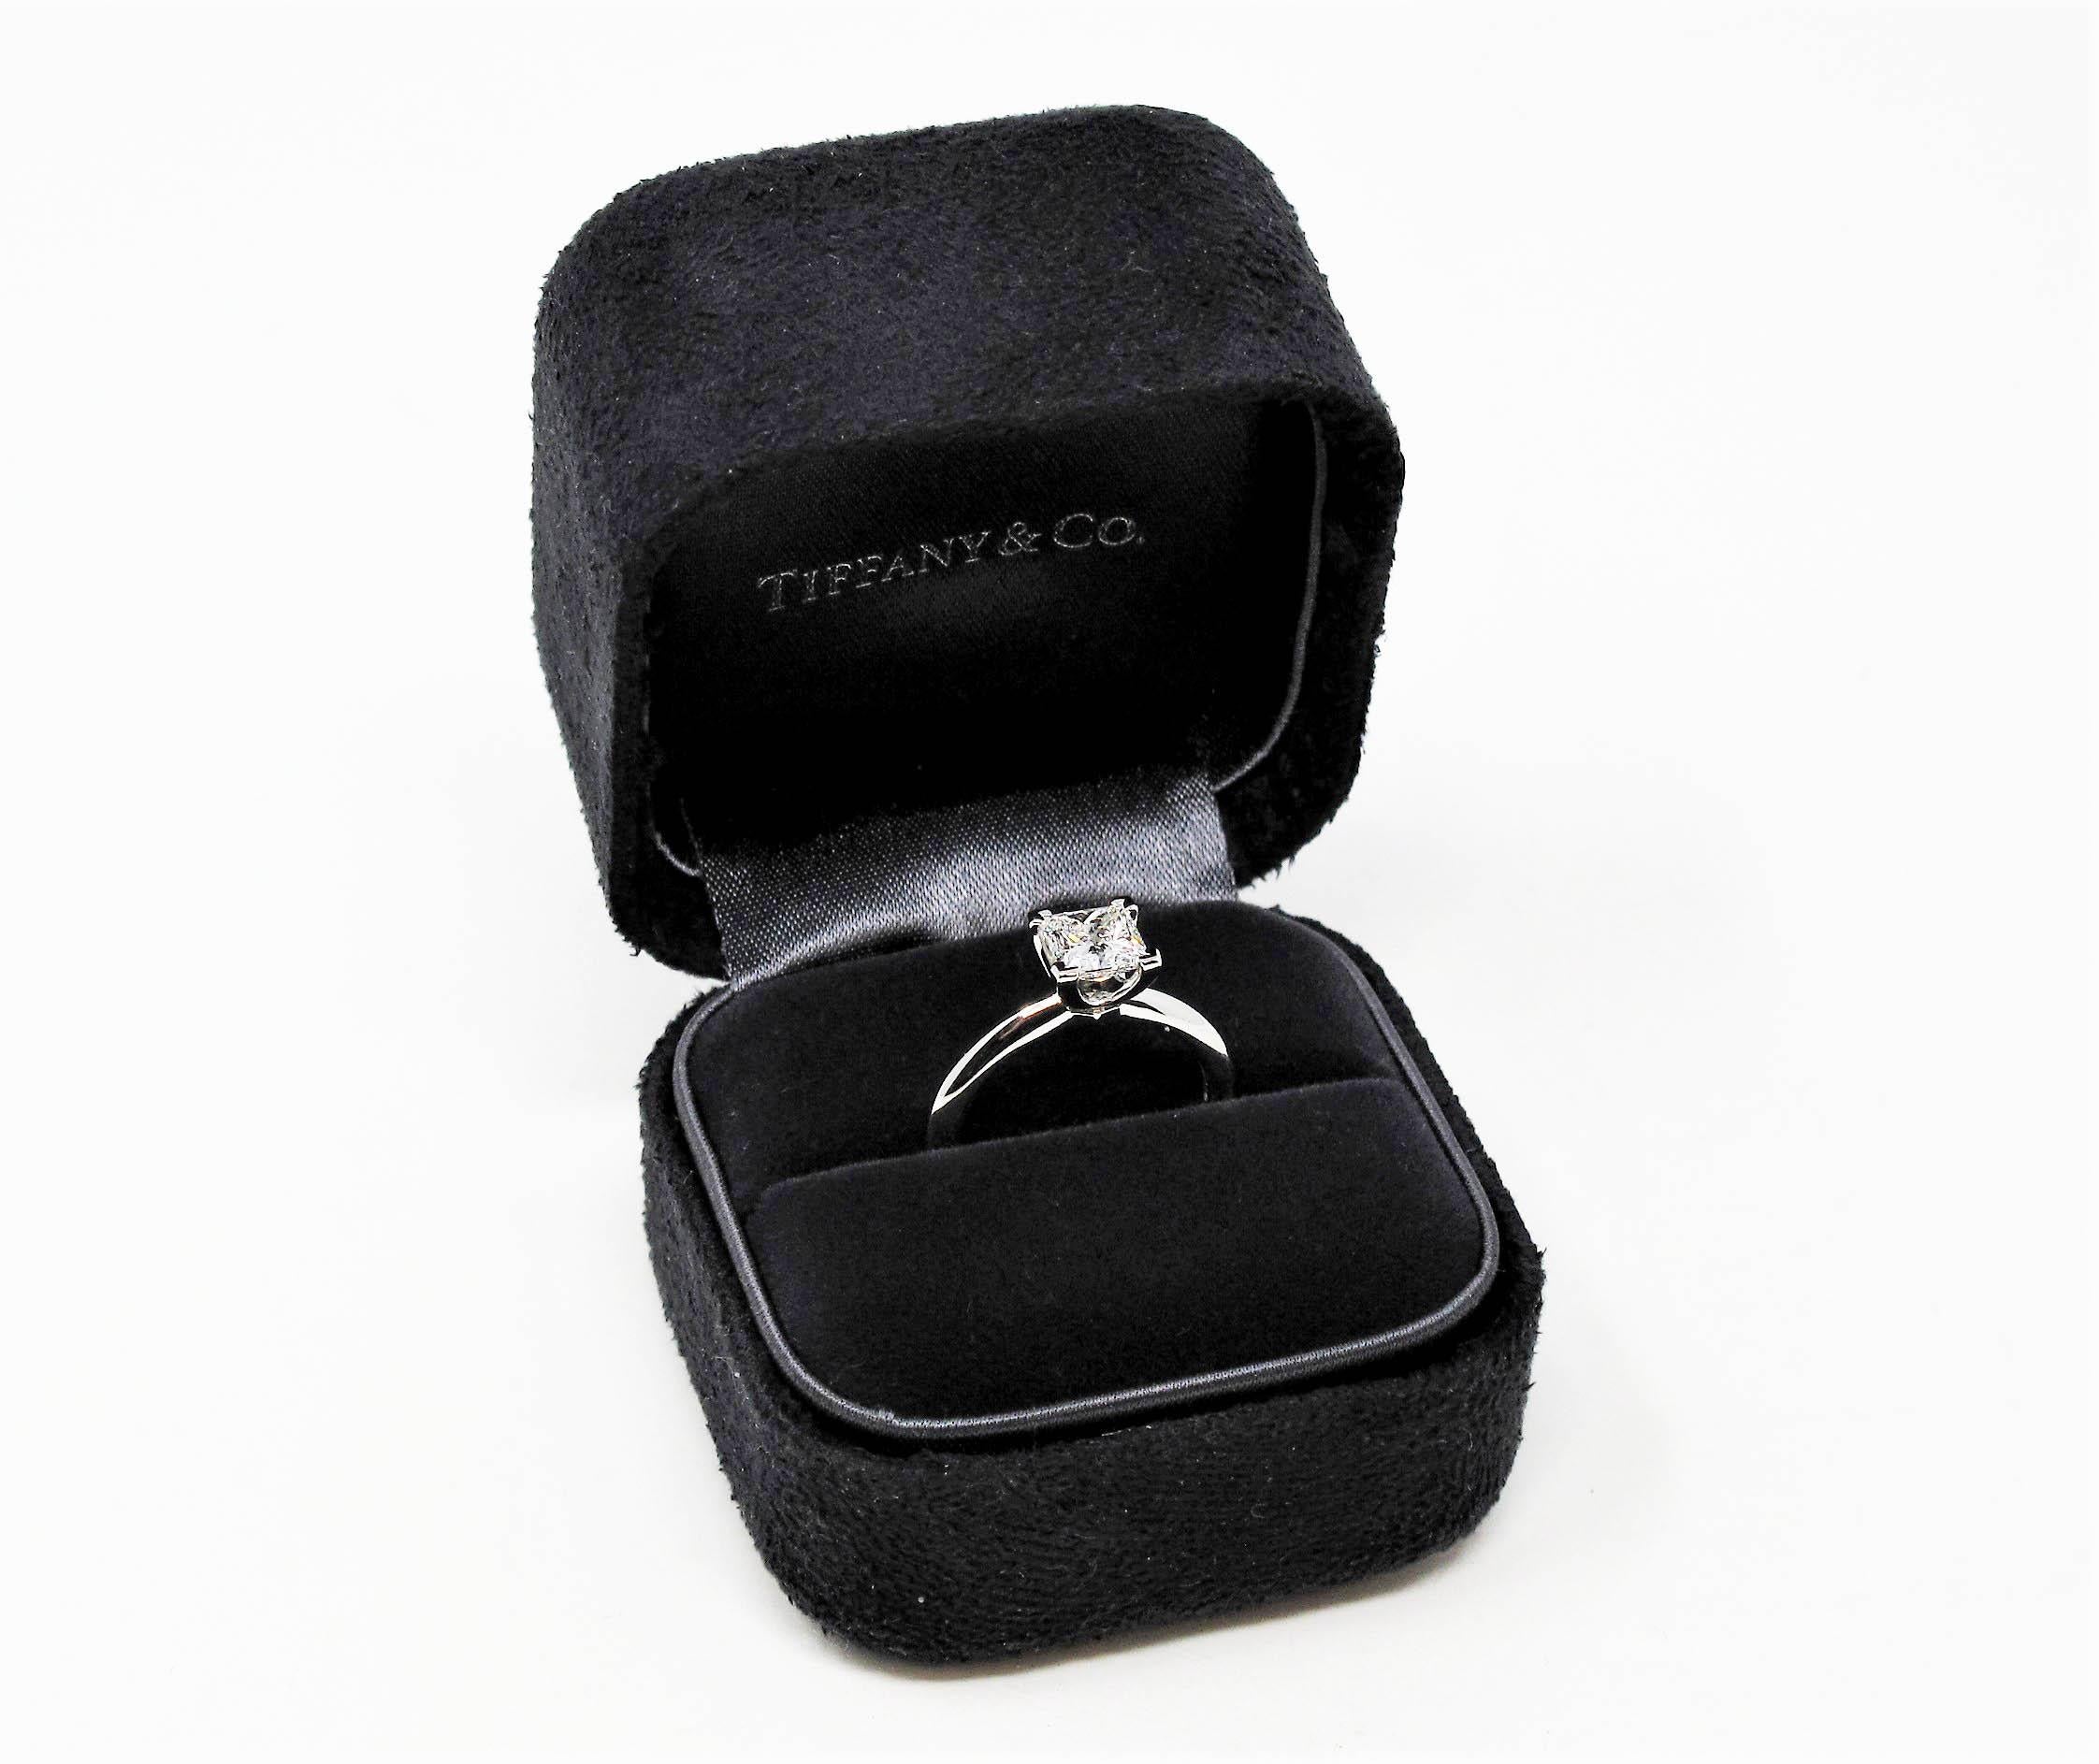 Say yes to this gorgeous diamond solitaire engagement ring from Tiffany & Co.! This classic, Tiffany style diamond solitaire ring is the epitome of timeless elegance. The brilliant square, icy white diamond sparkles radiantly on the finger, while